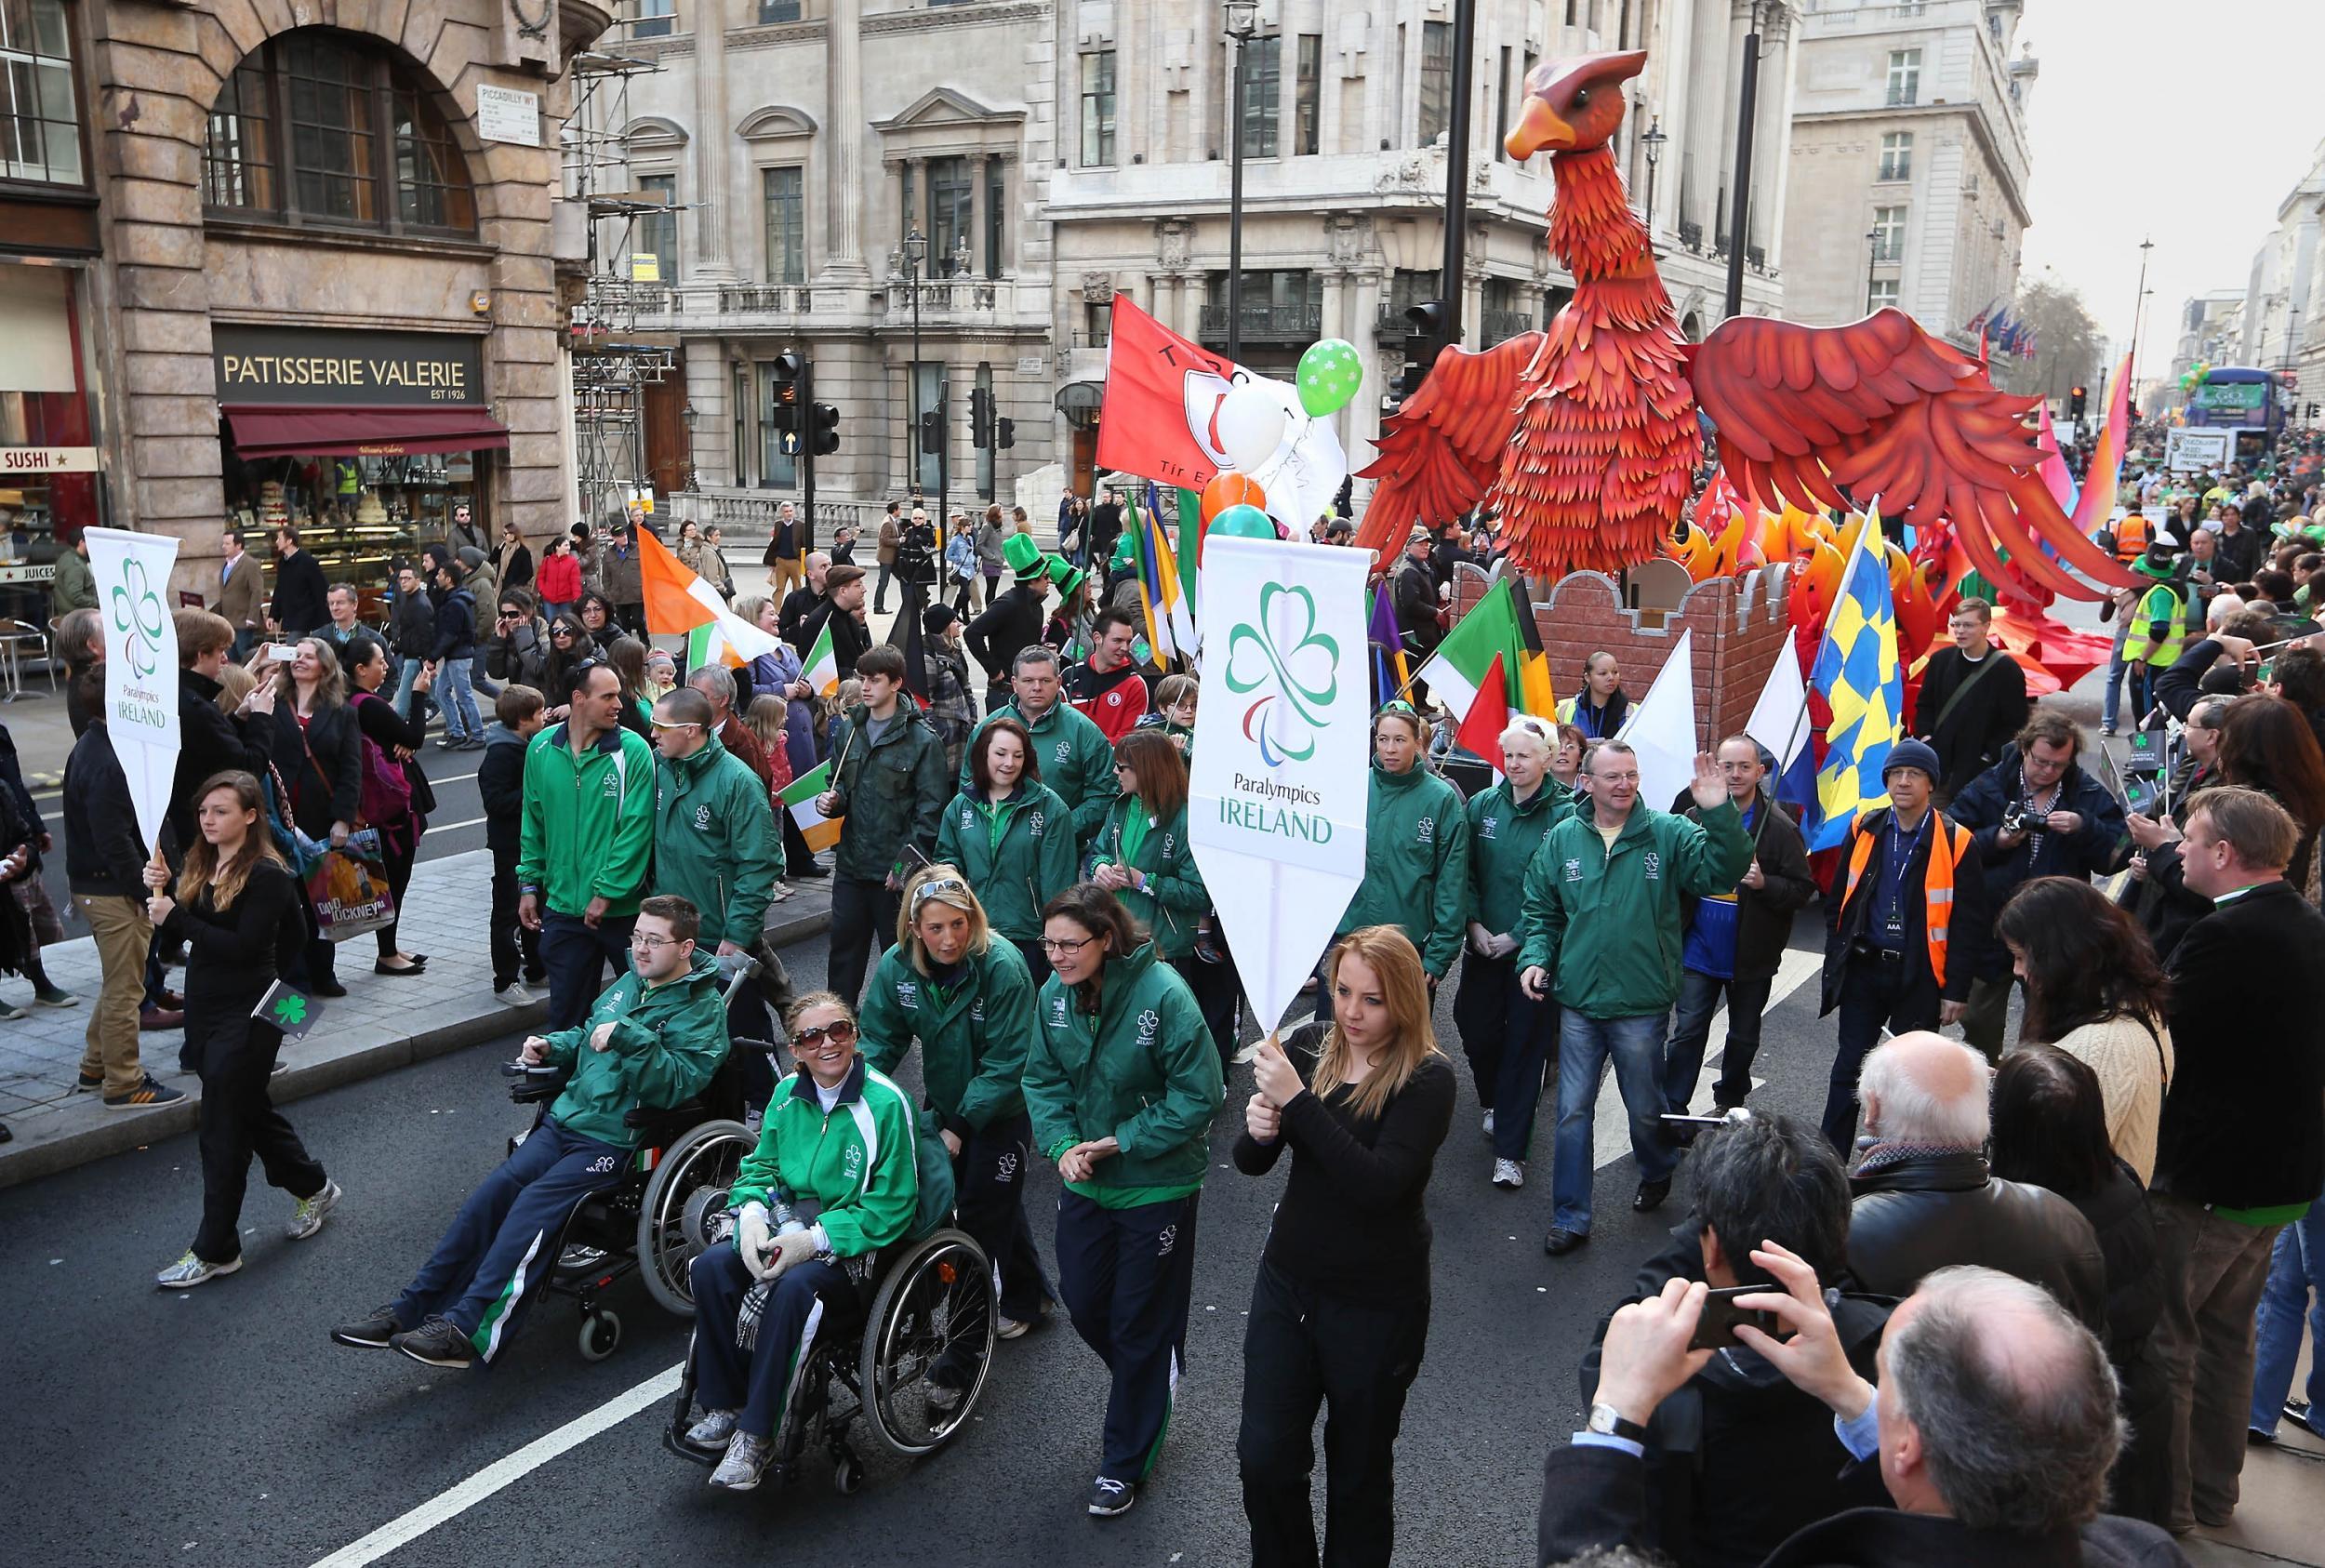 London's St Patrick's Day parade will happen on March 18 (Getty)